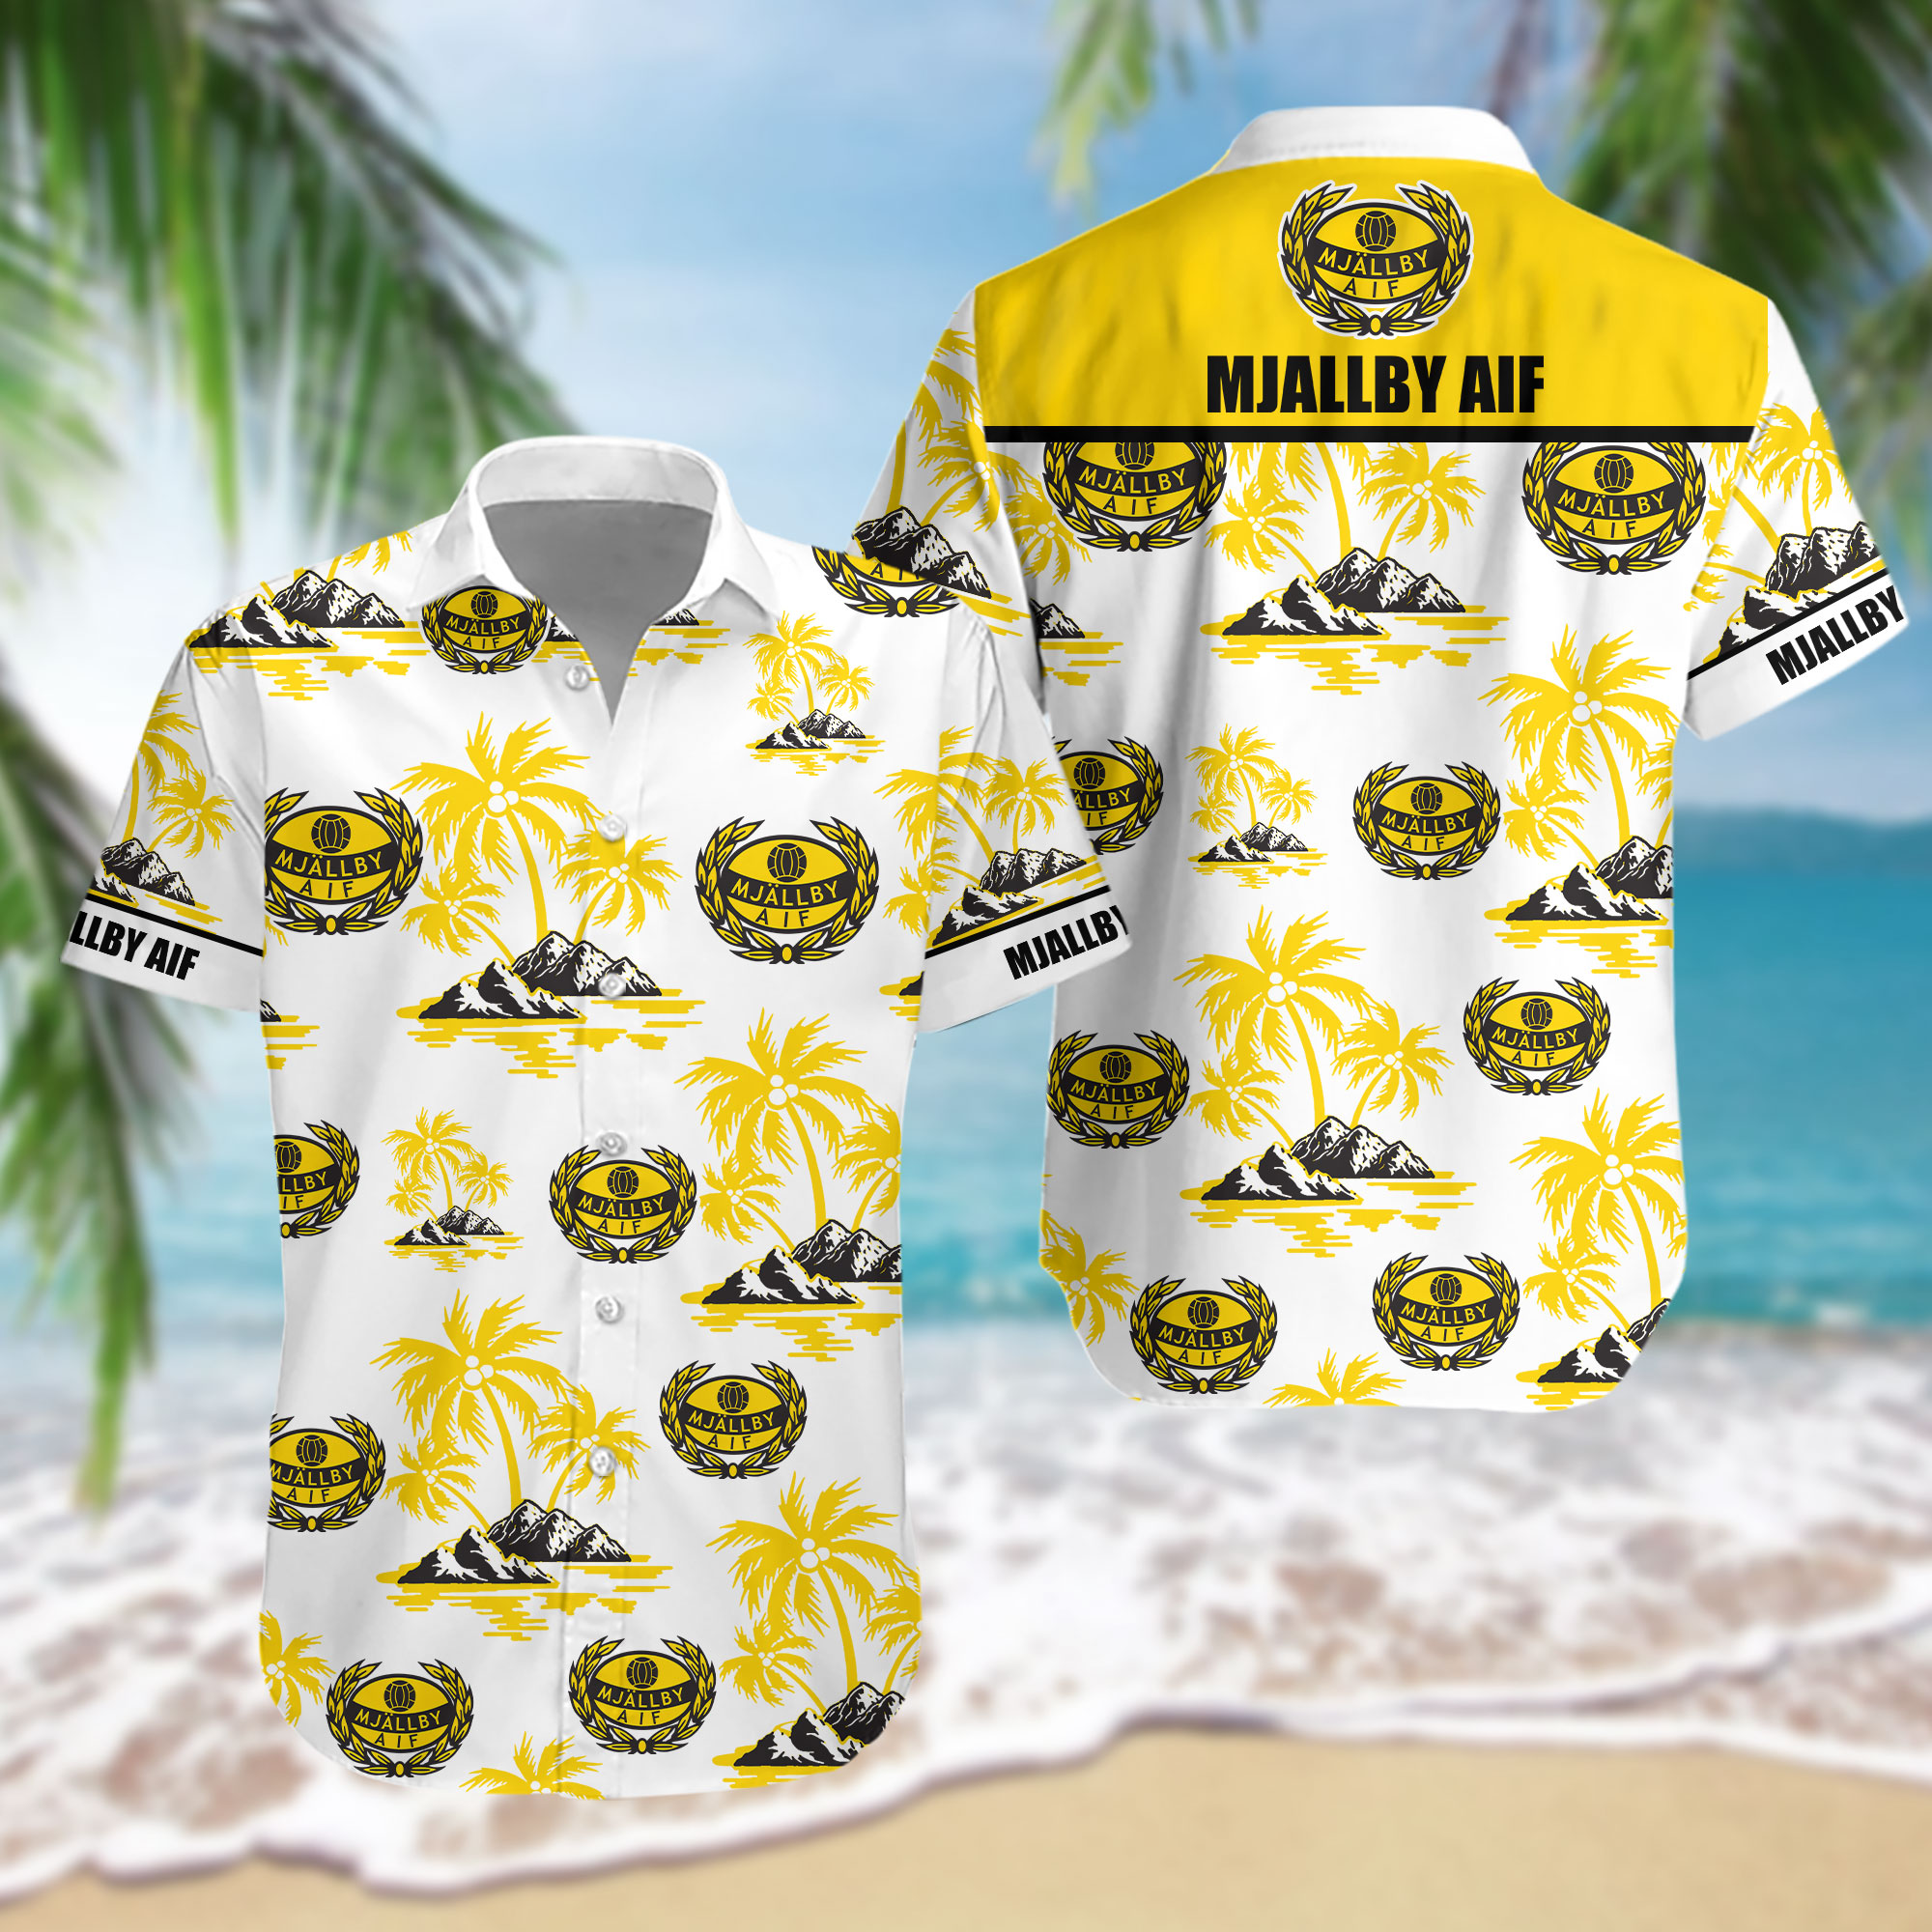 These Hawaiian Shirt will be a great choice for any type of occasion 24